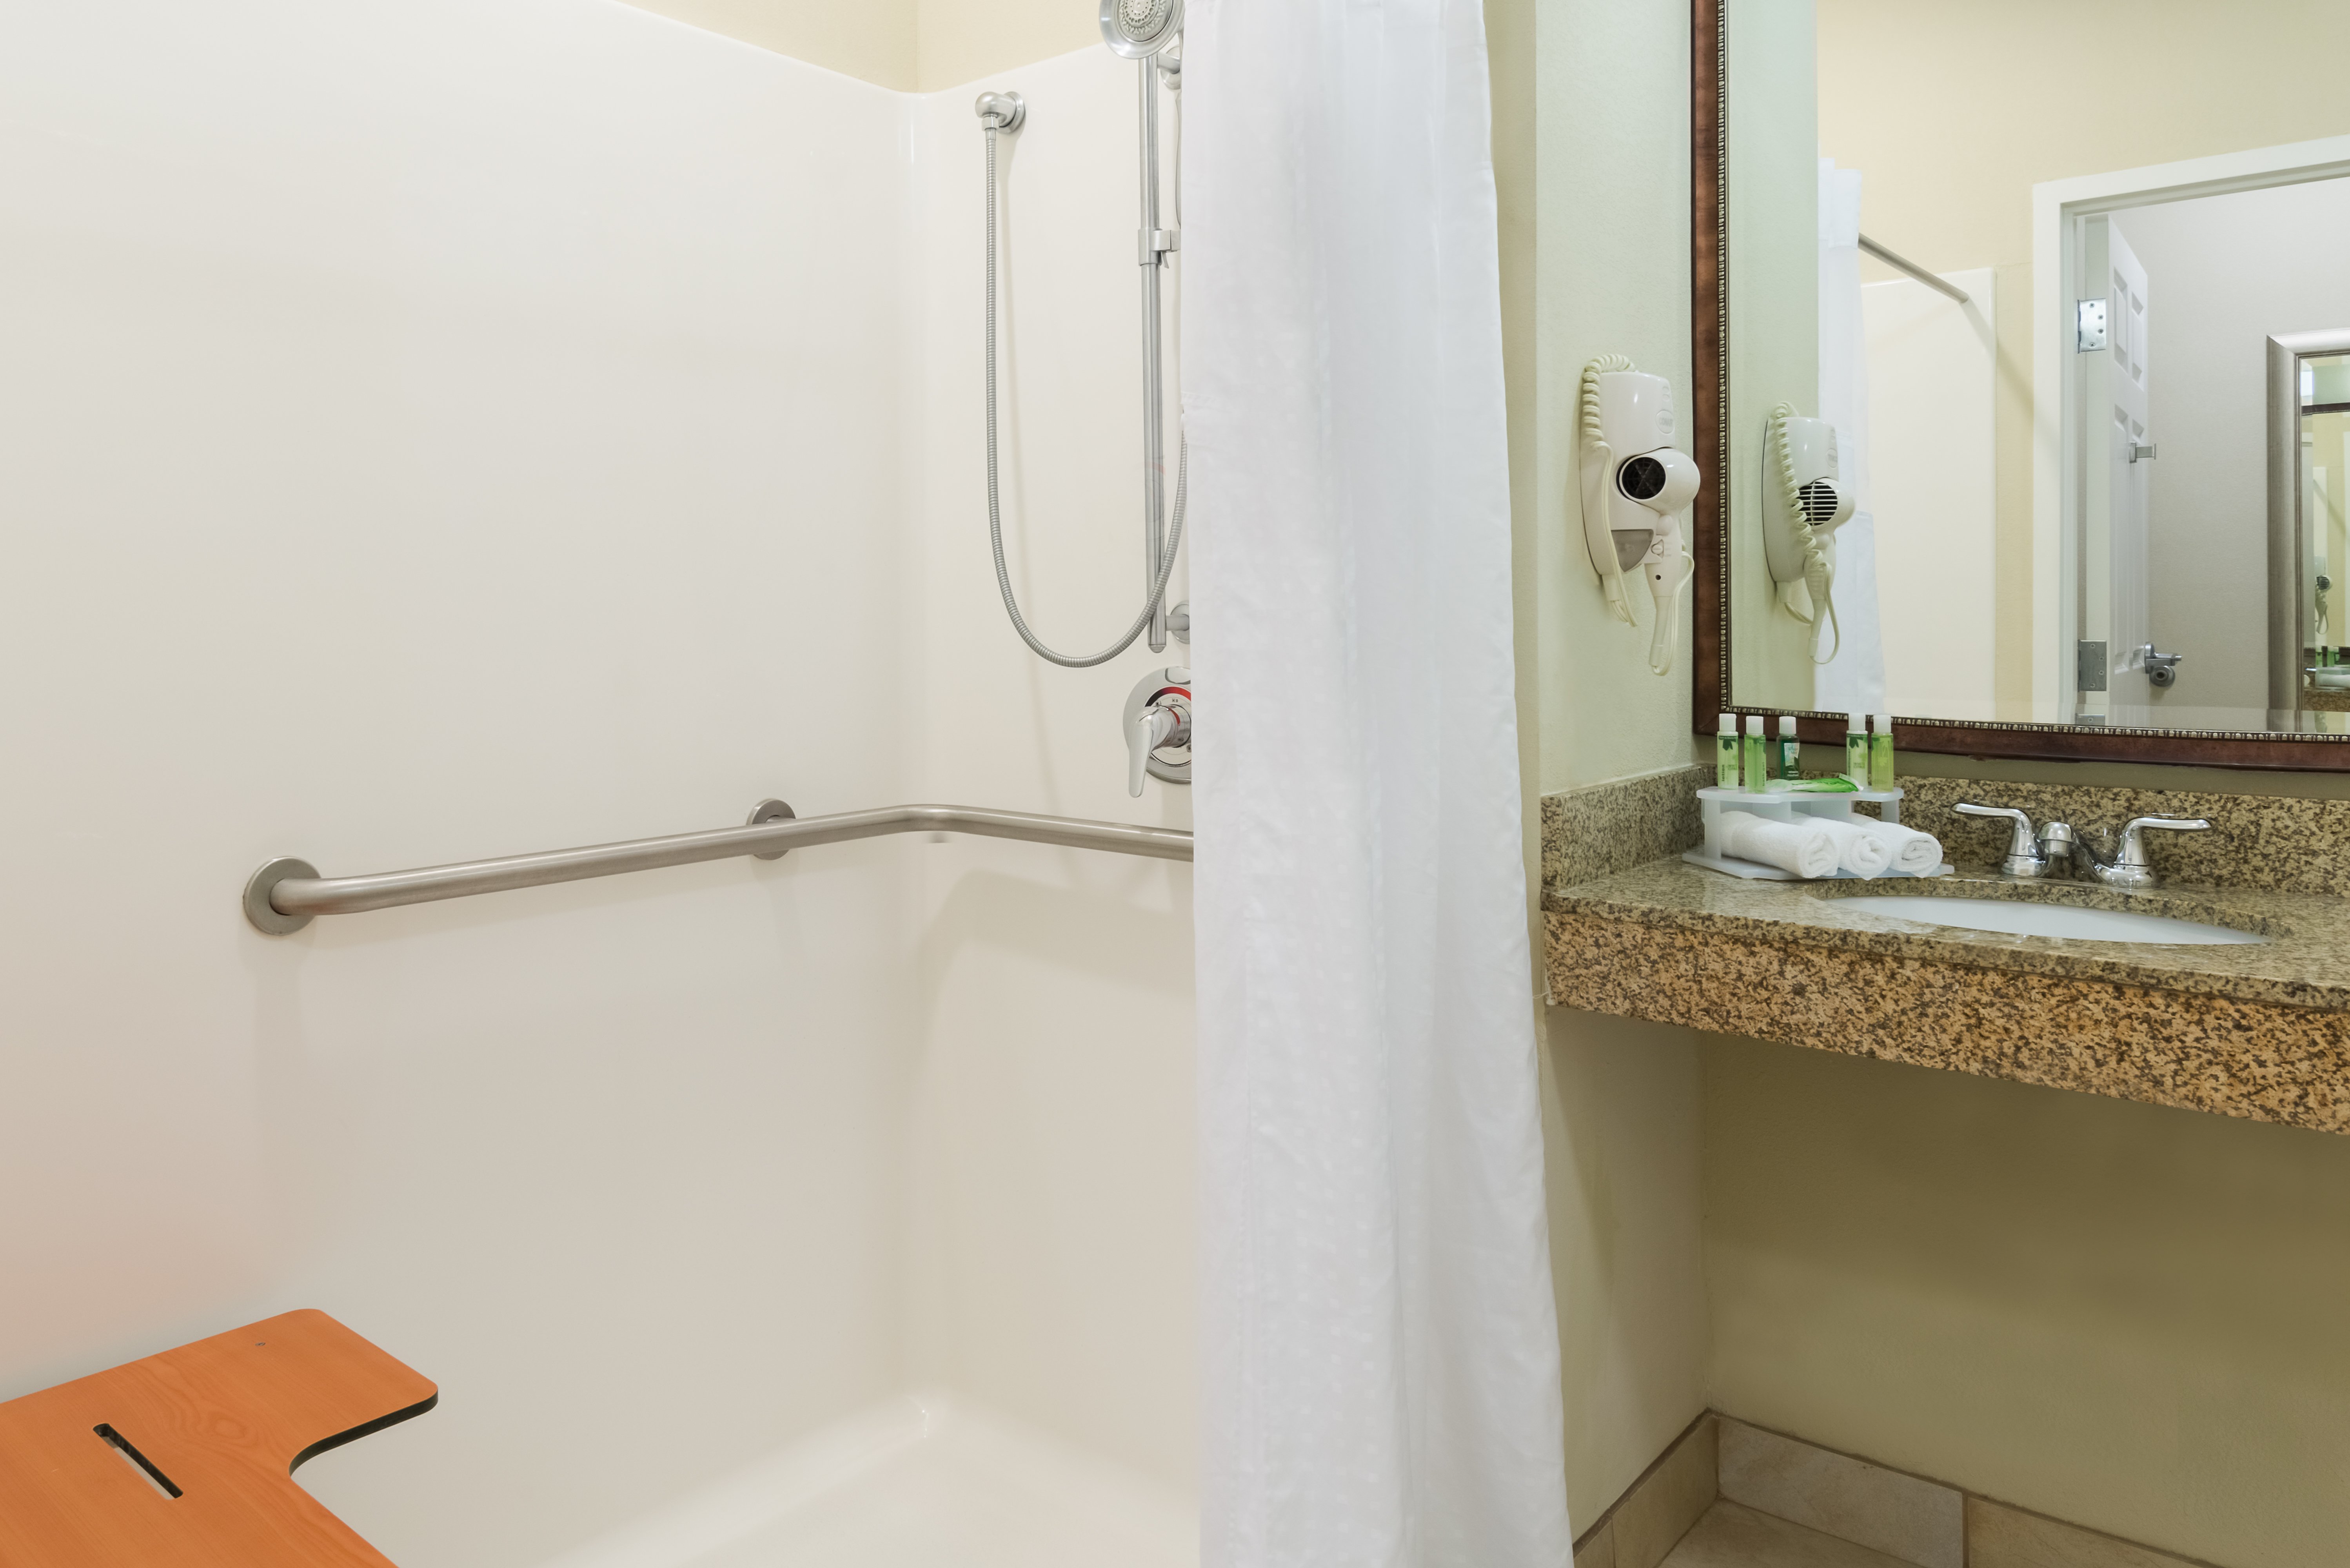 ADA/Handicapped accessible Guest Bathroom with roll-in shower